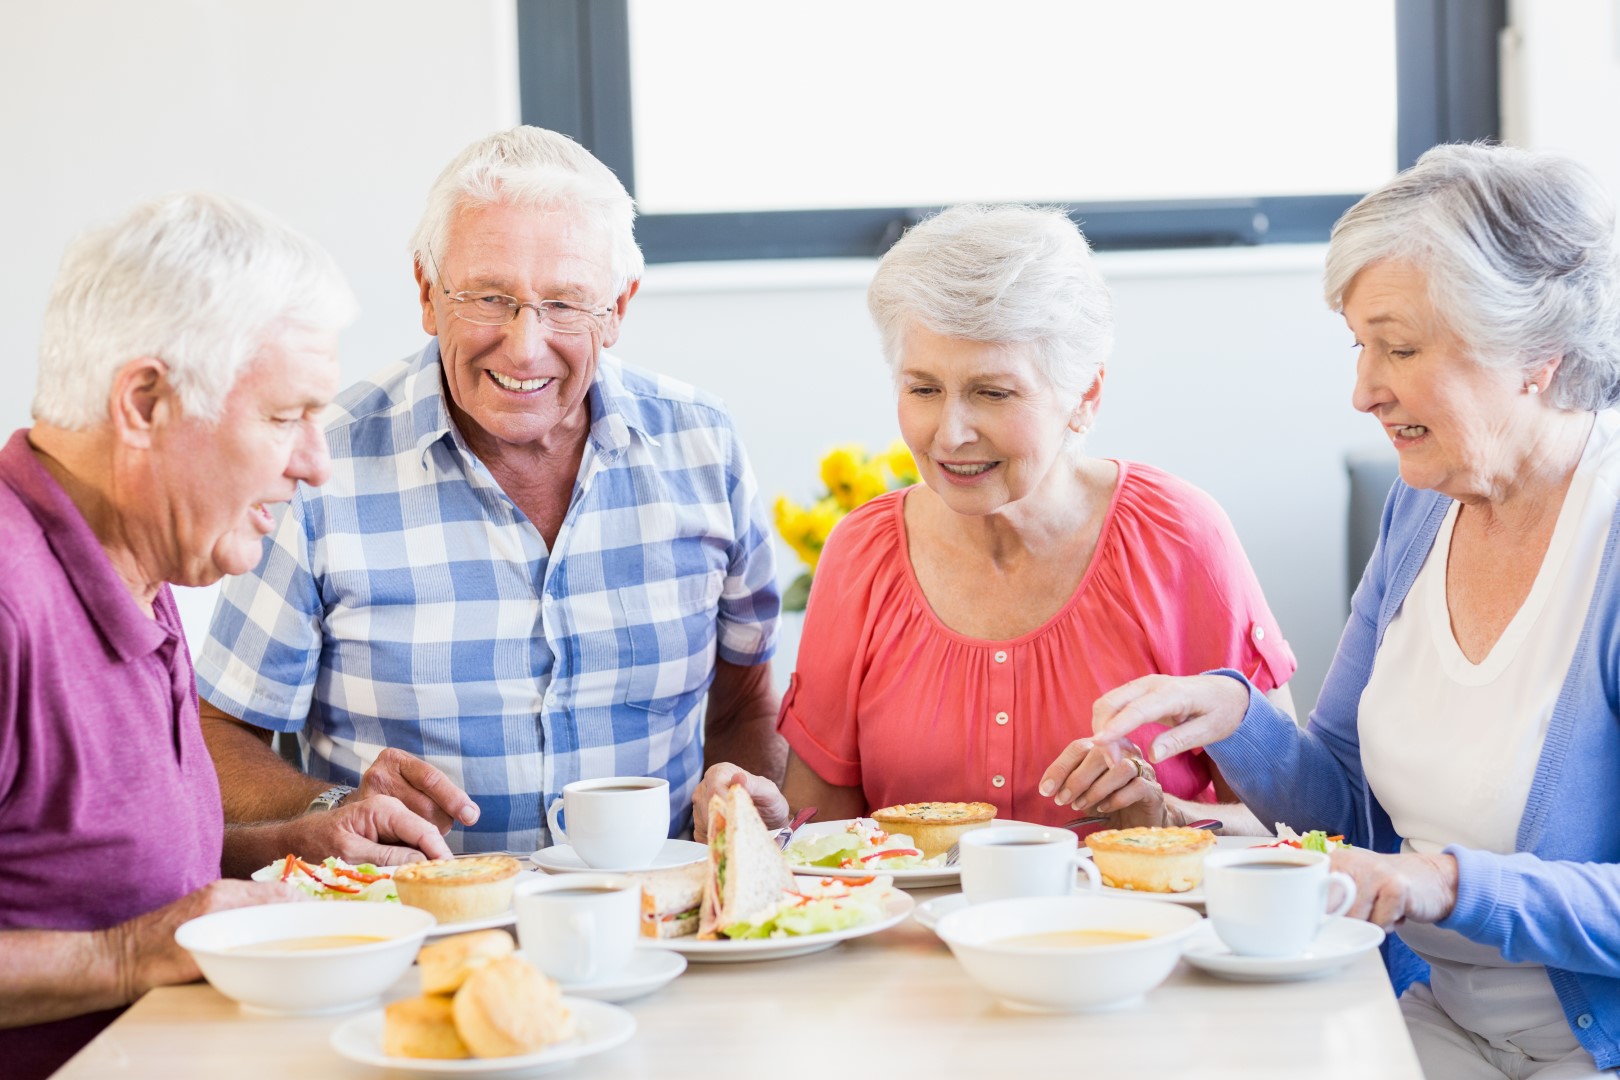 Is Assisted Living the Right Choice for Me?